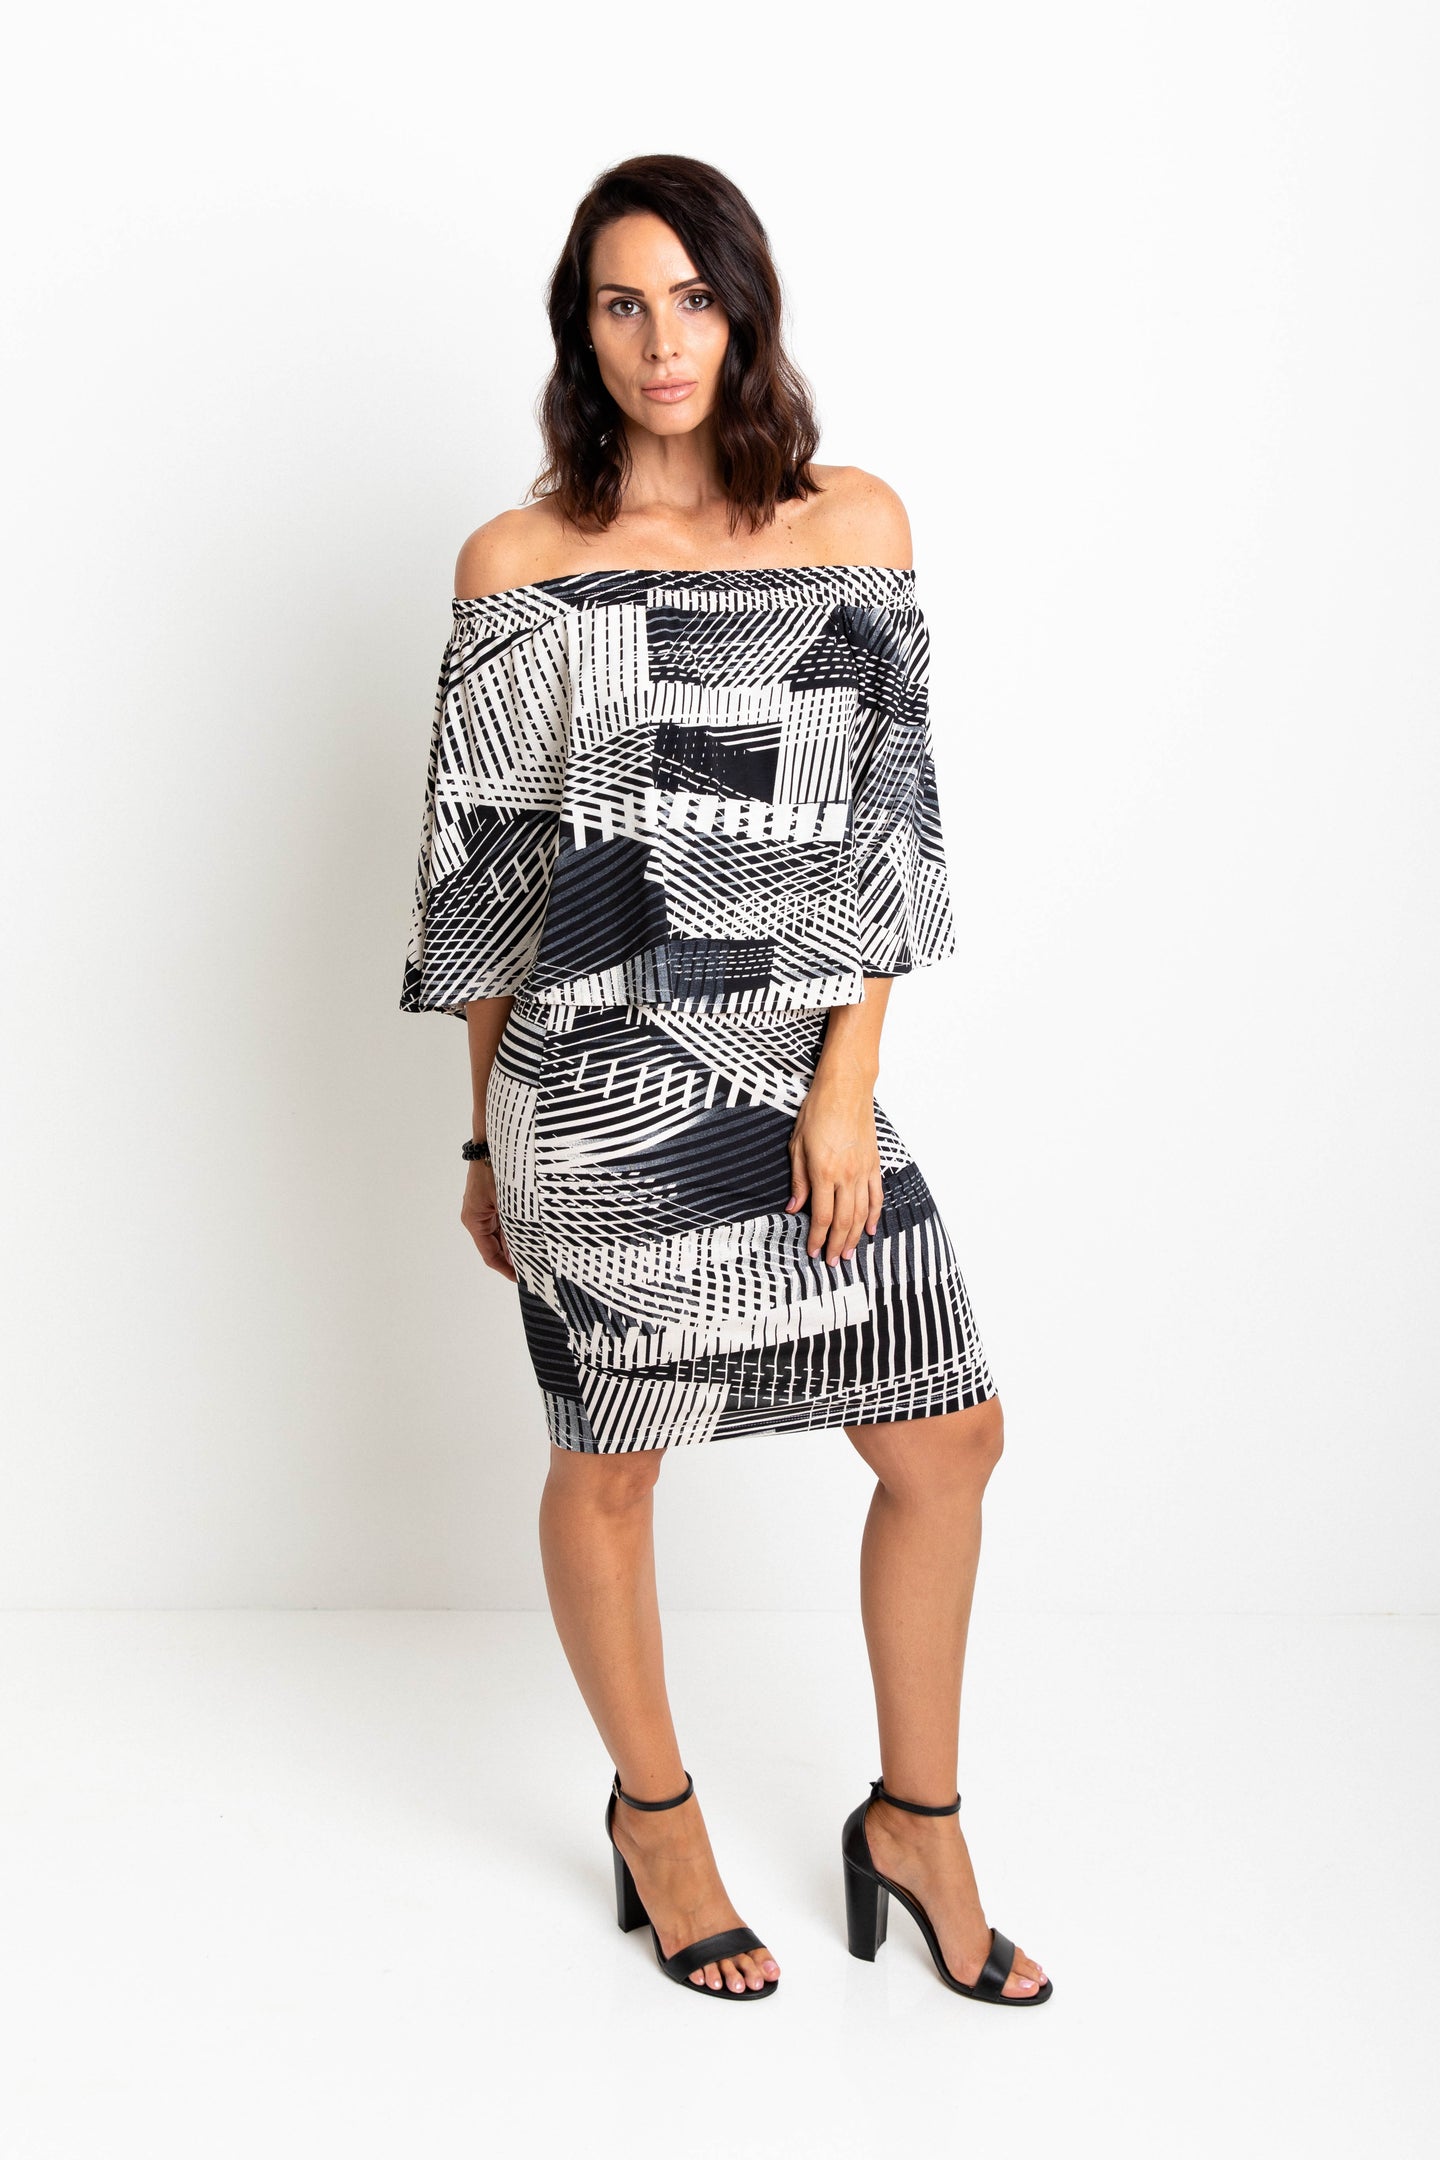 OVER 70% OFF No Shade Here Dress Mid - Graphic